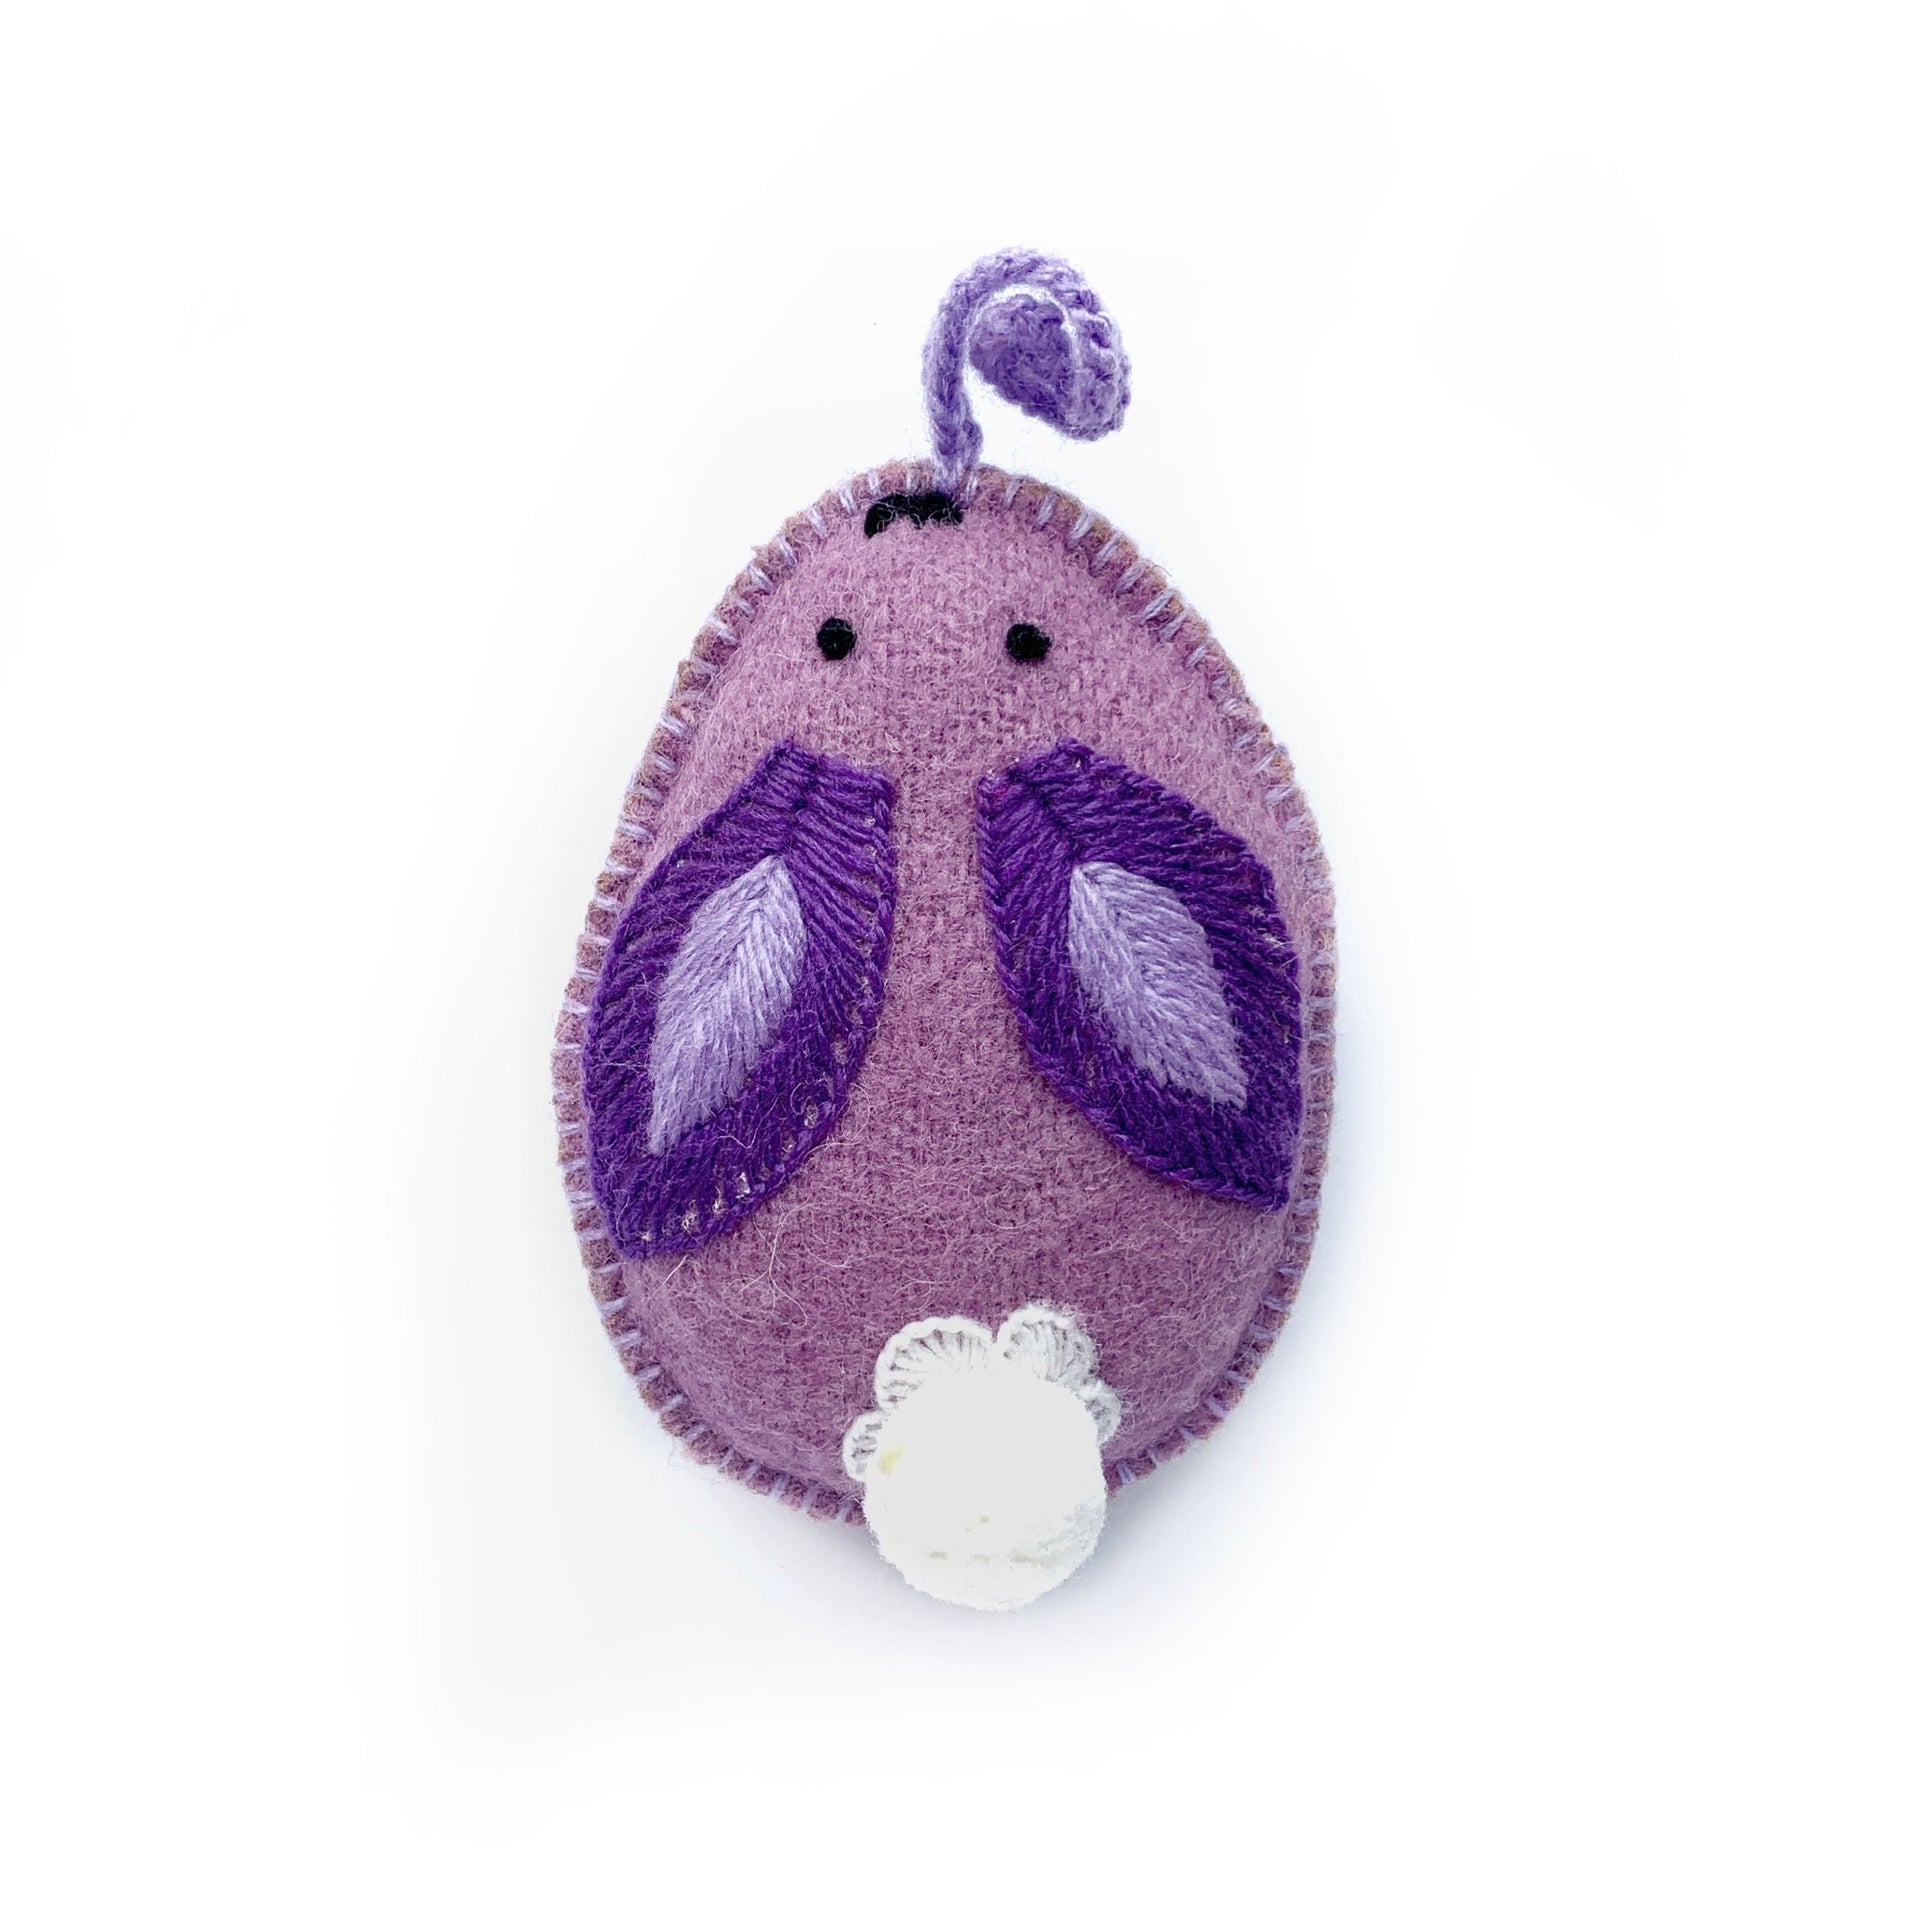 purple bunny egg Easter ornament with pom pom tail.